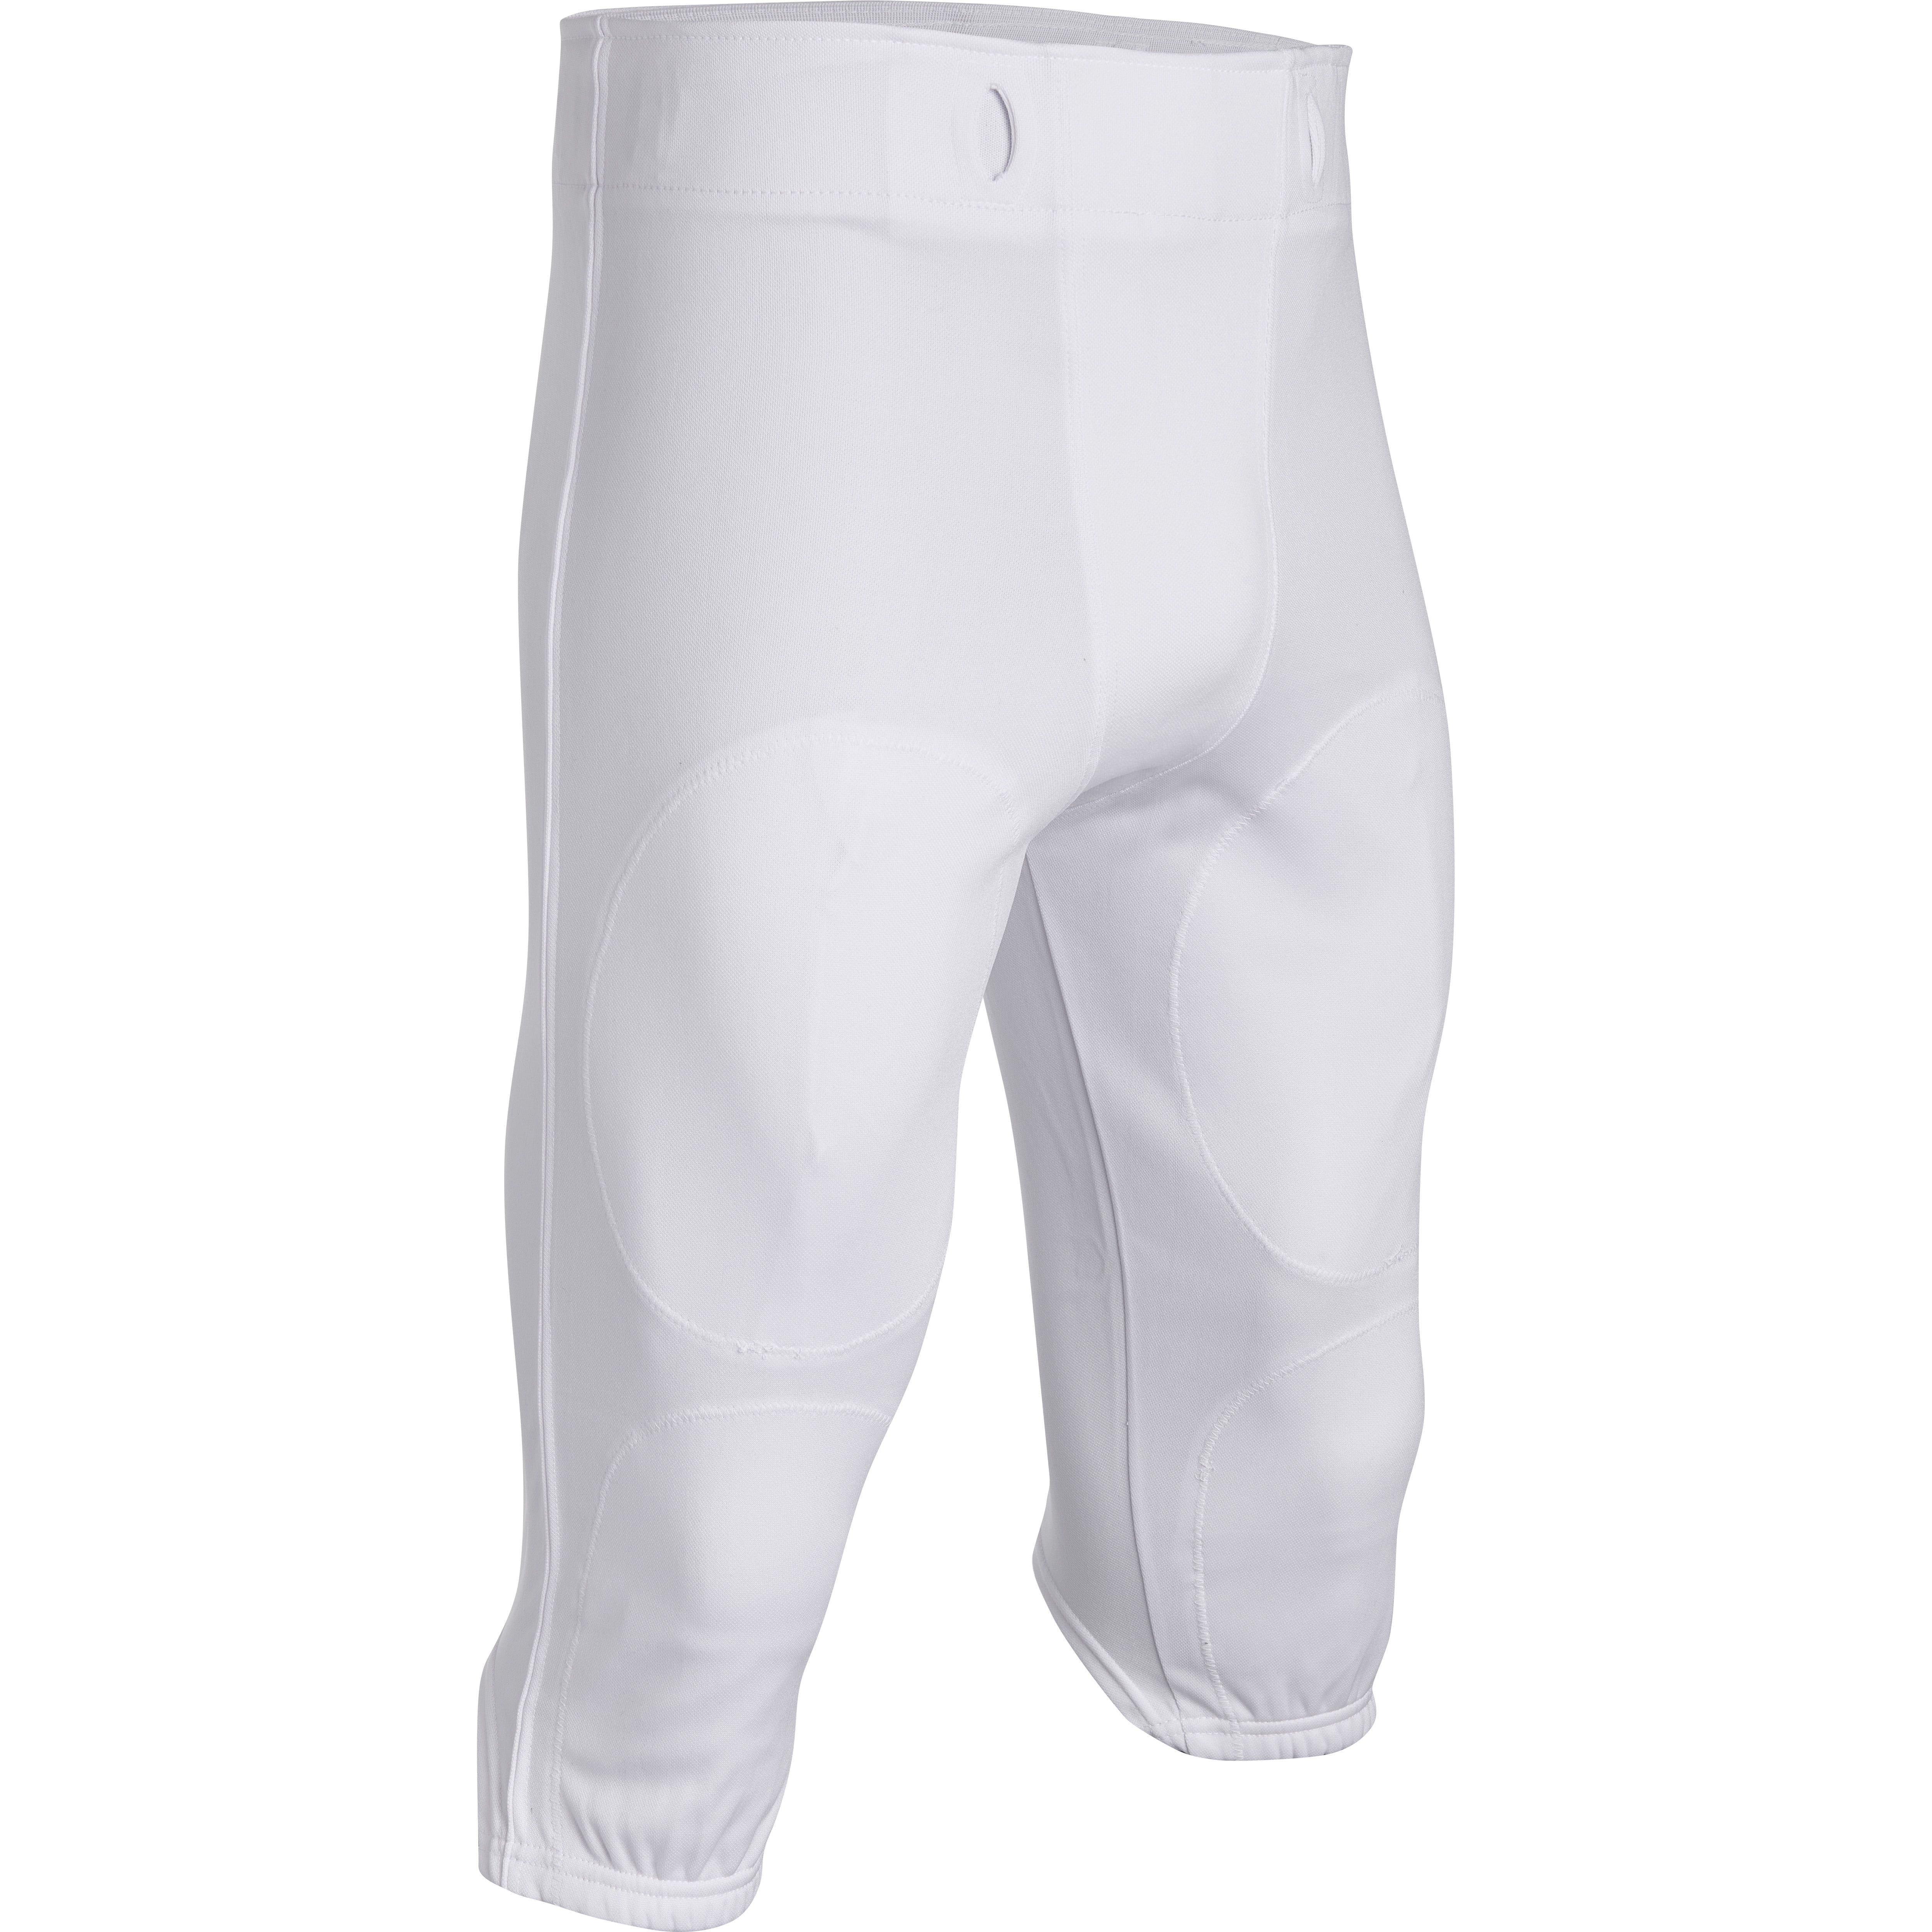 Sports Unlimited Double Knit Youth Integrated Football Pants - Sports  Unlimited